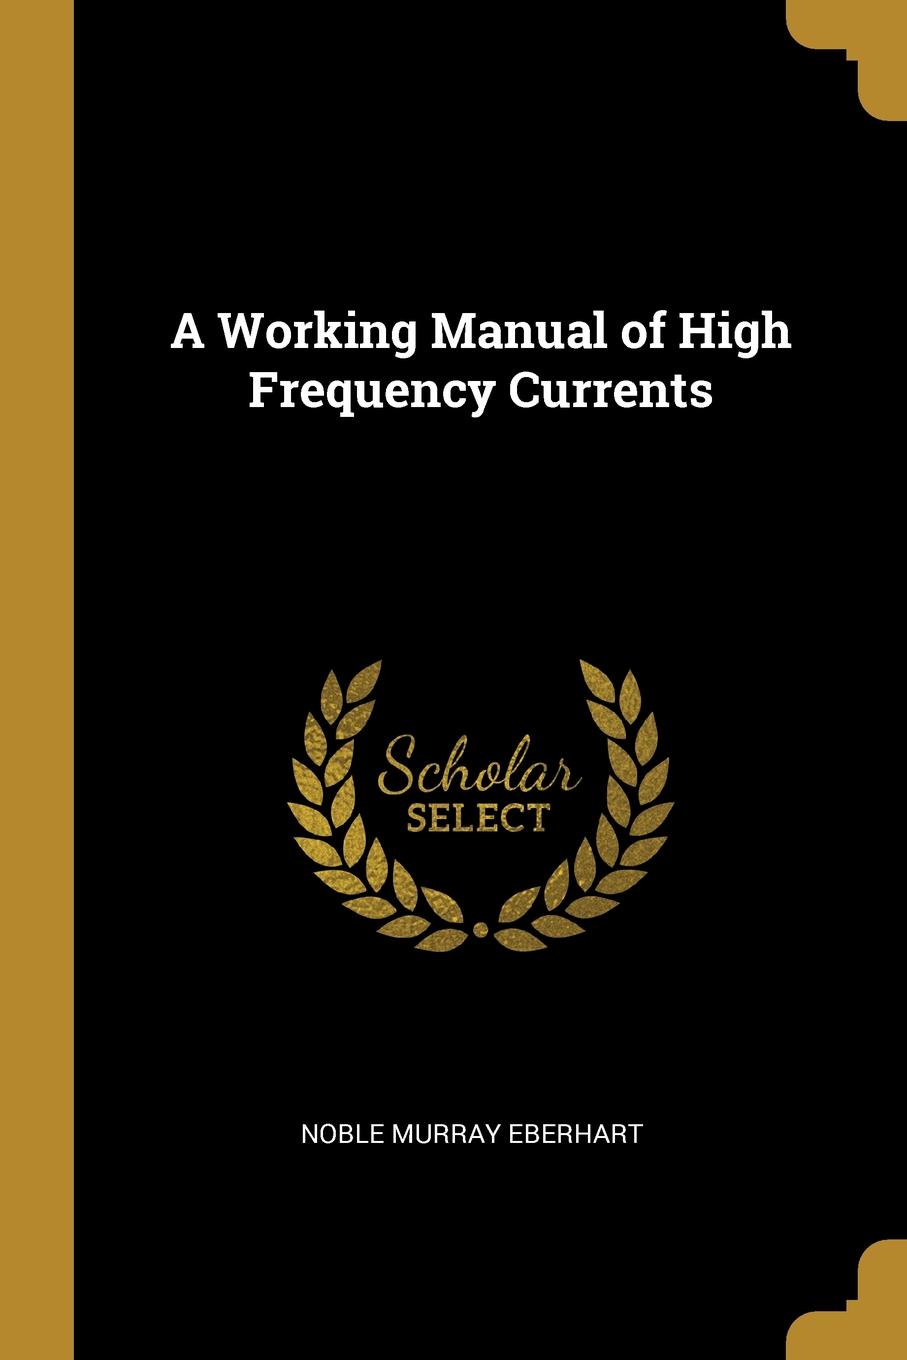 A Working Manual of High Frequency Currents